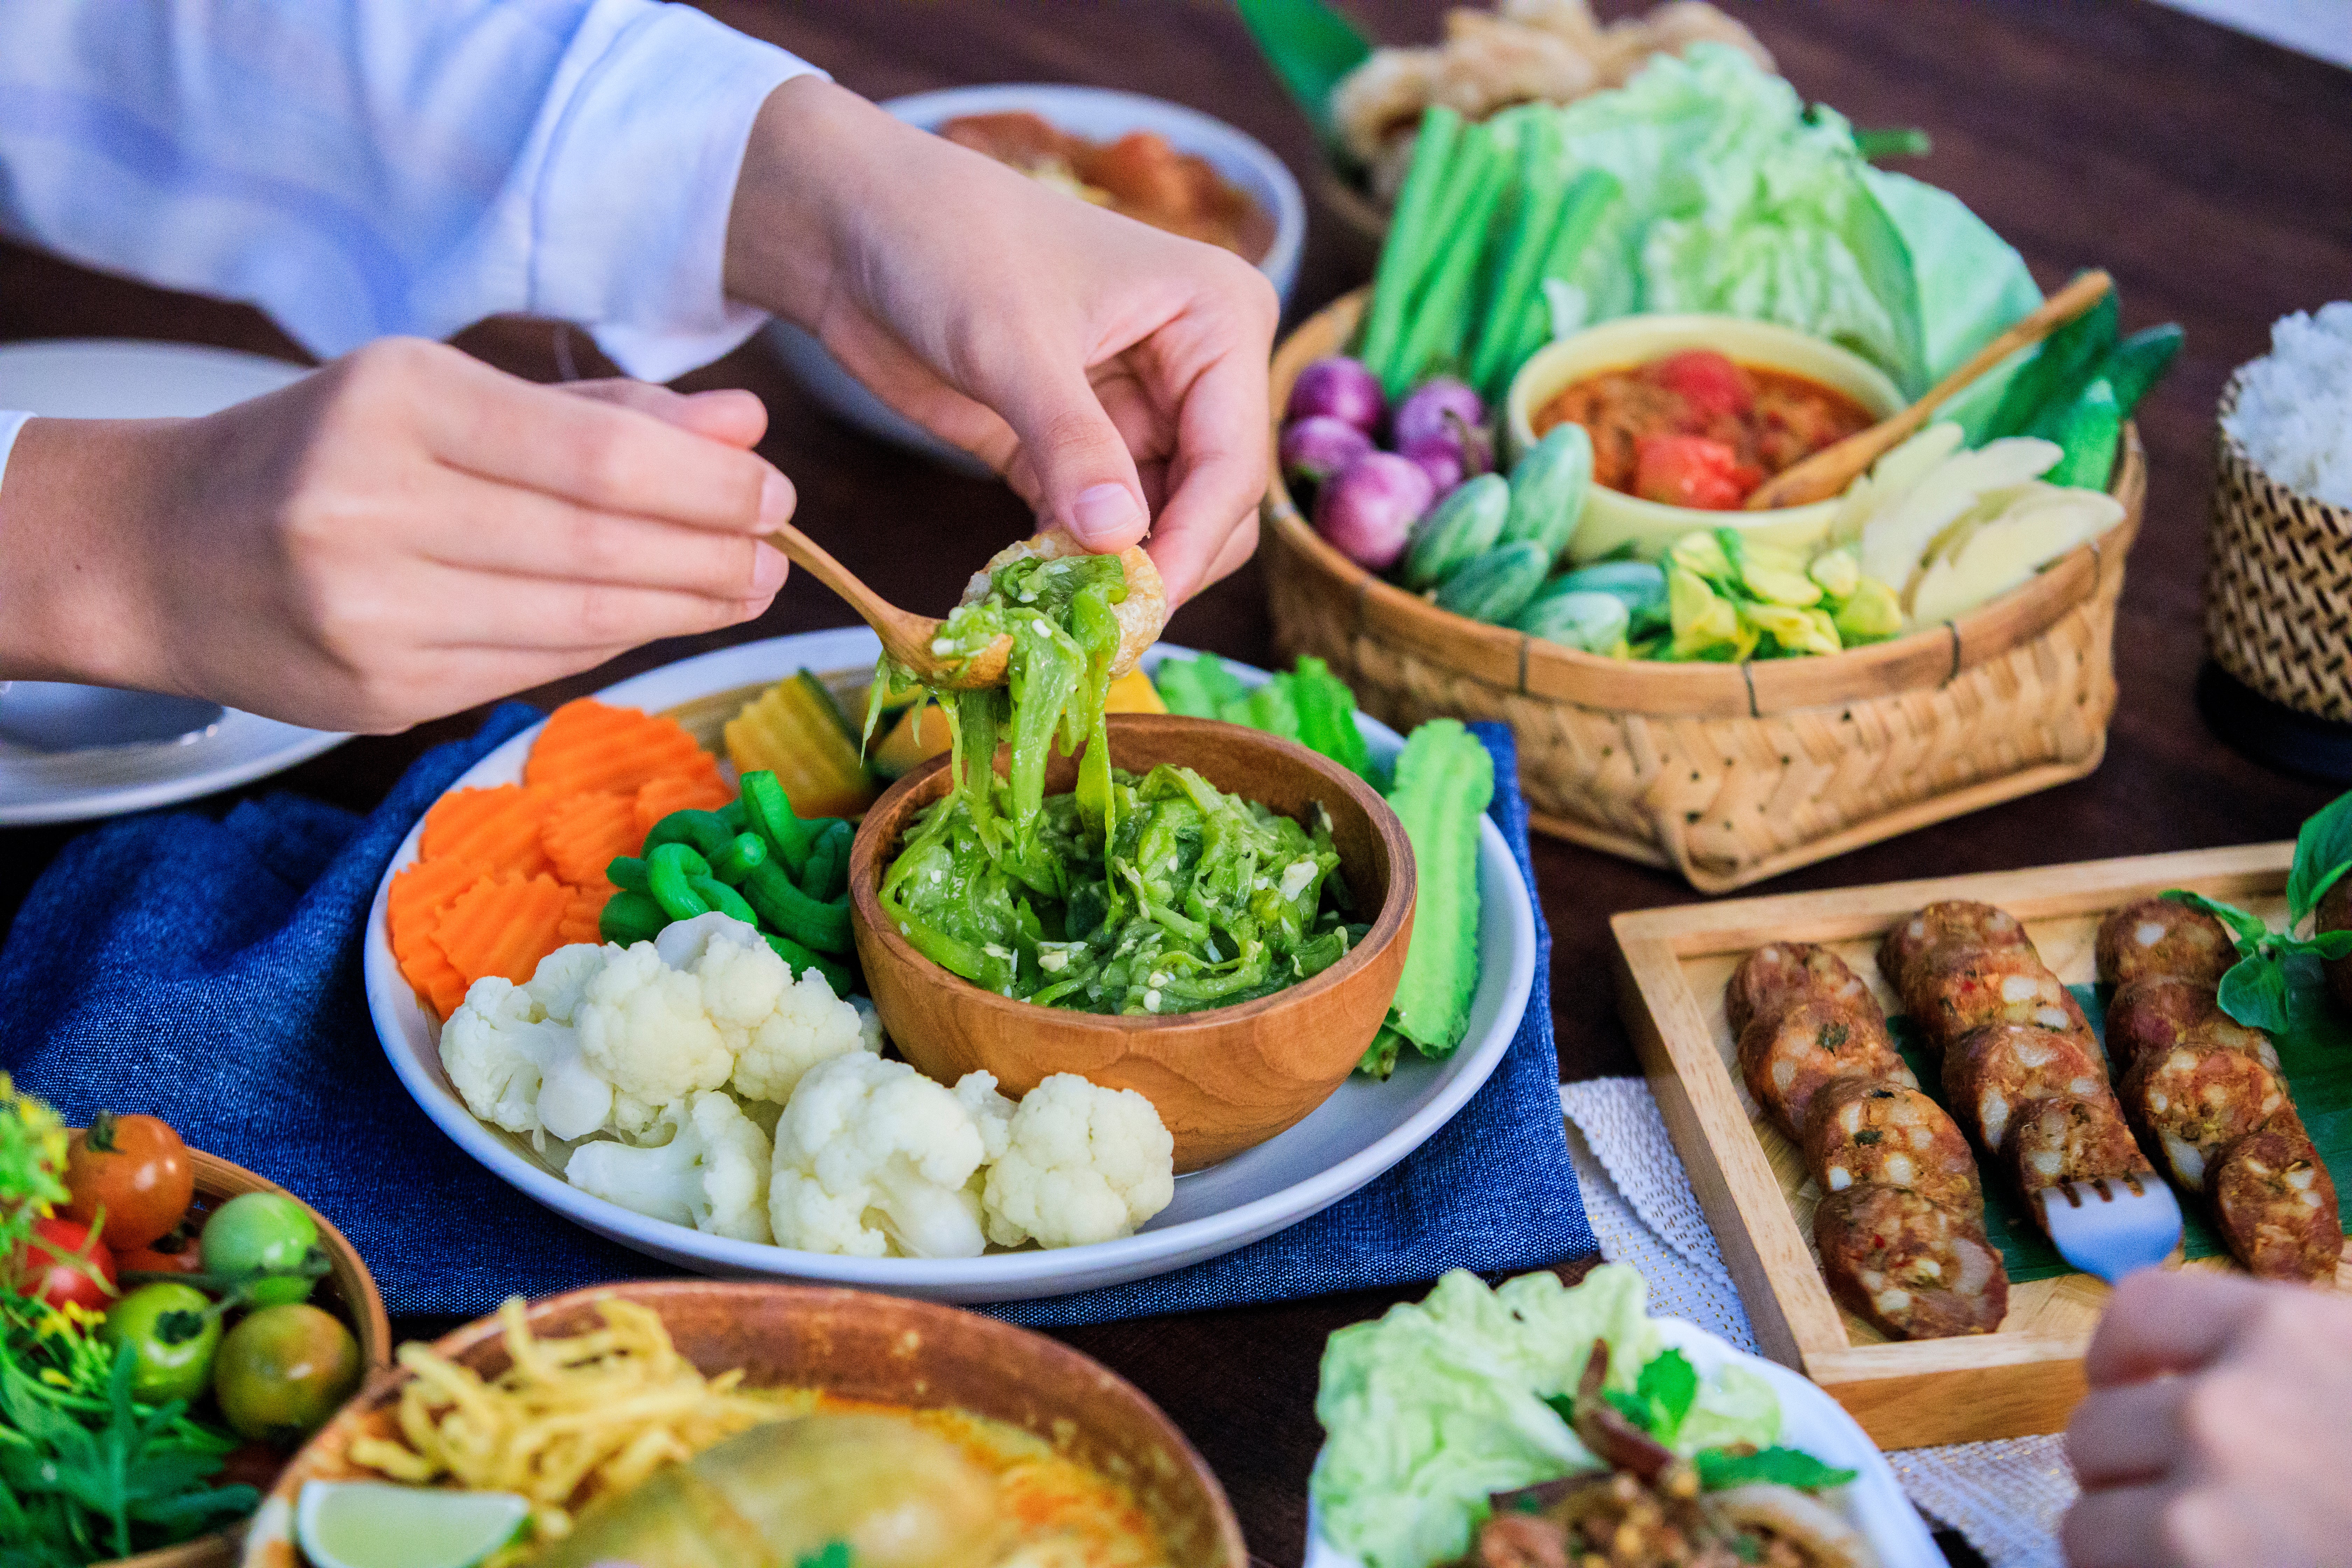 Northern Thai food is a whole new genre to discover